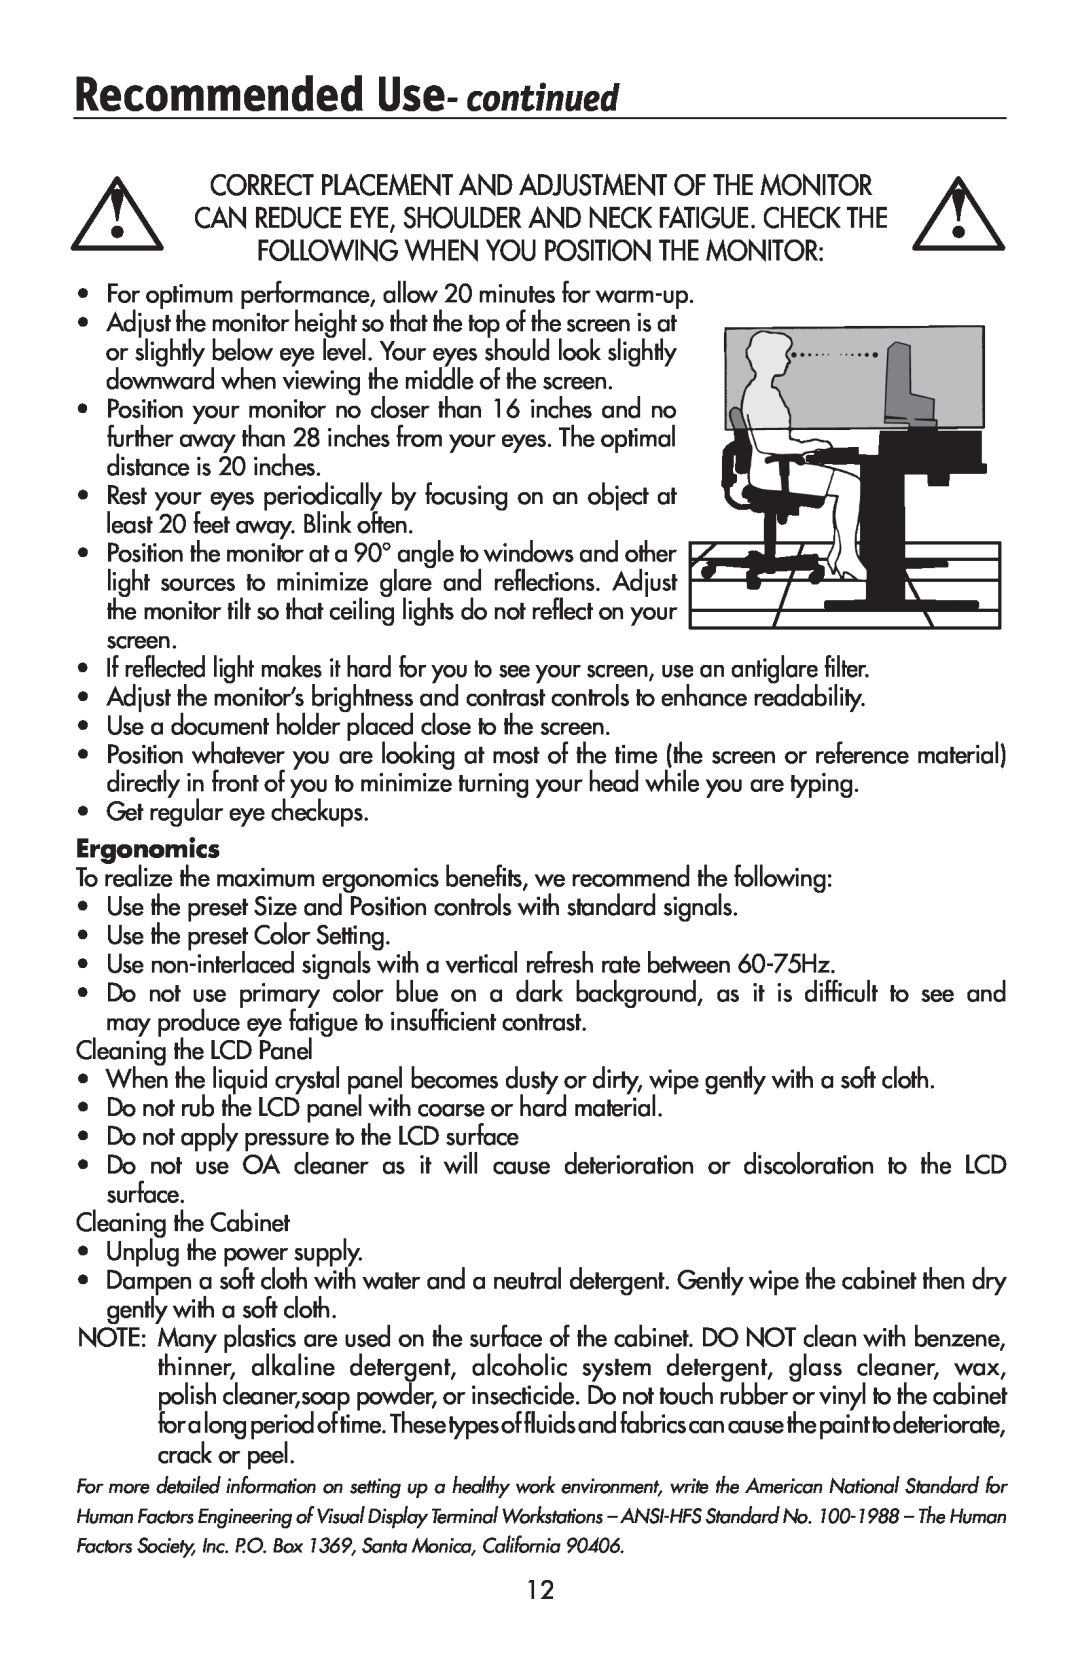 NEC 175VXM user manual Recommended Use- continued, Correct Placement And Adjustment Of The Monitor, Ergonomics 